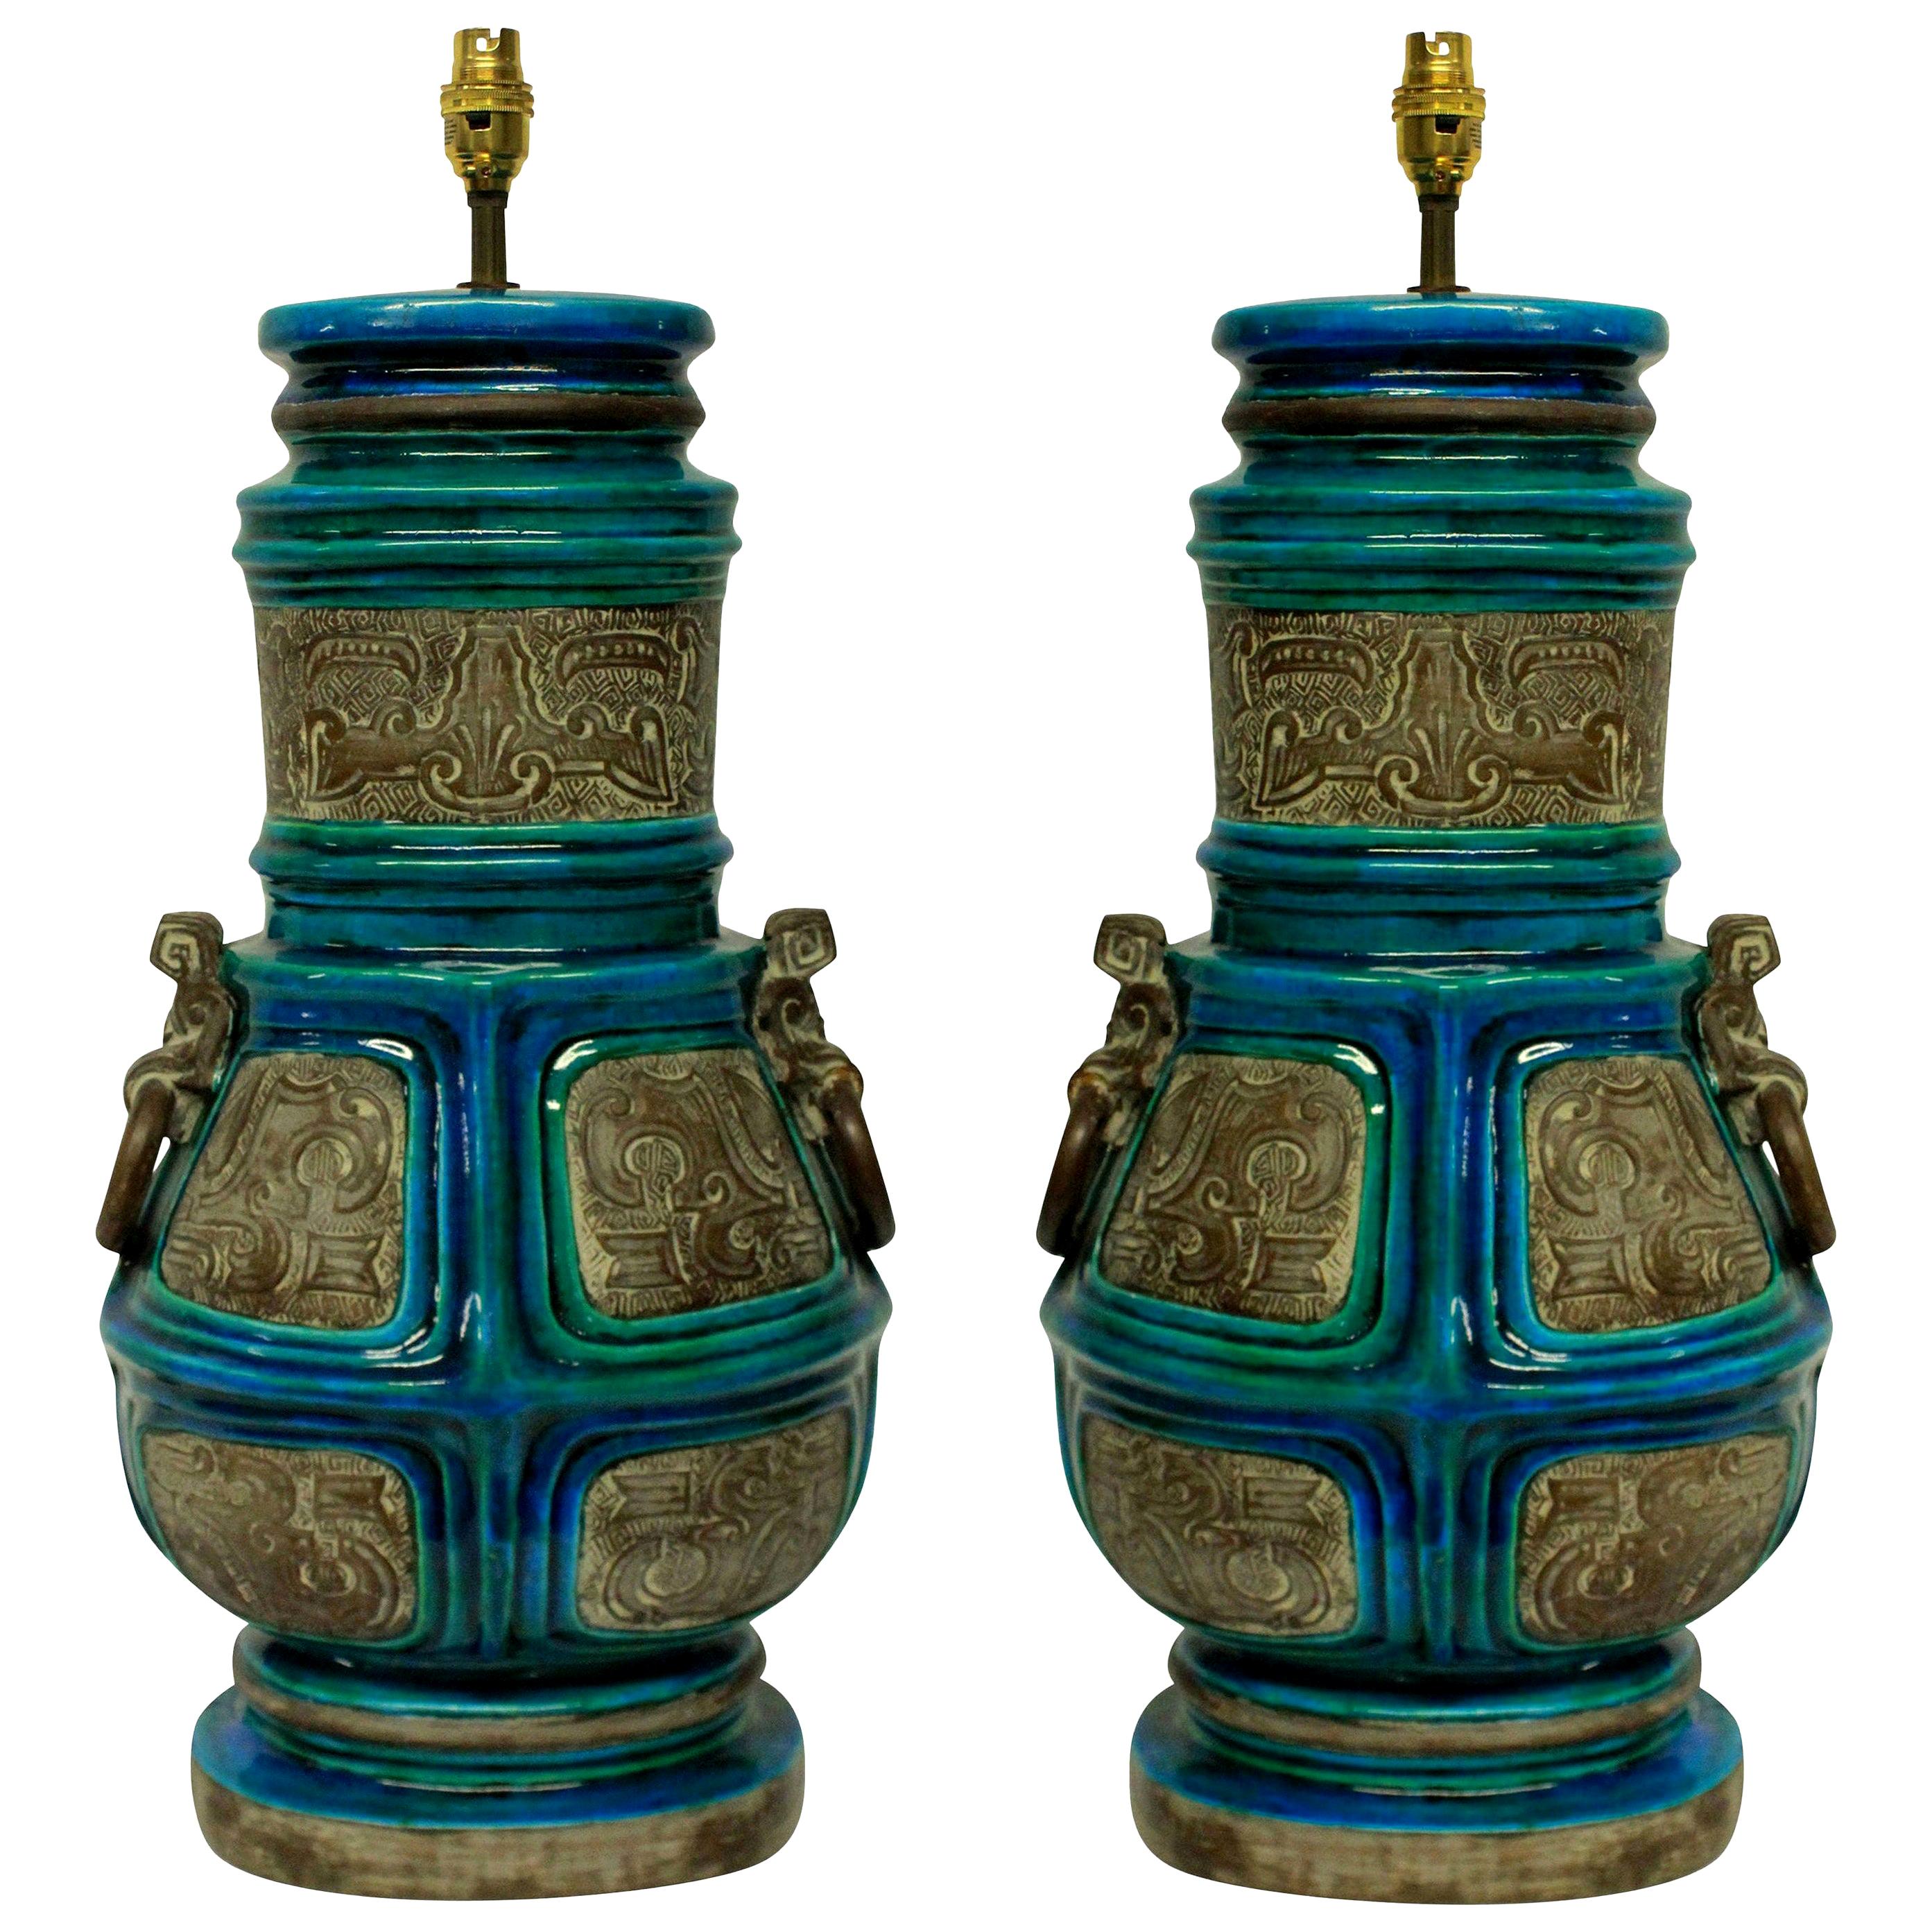 Large Pair of Ugo Zaccagnini Lamps